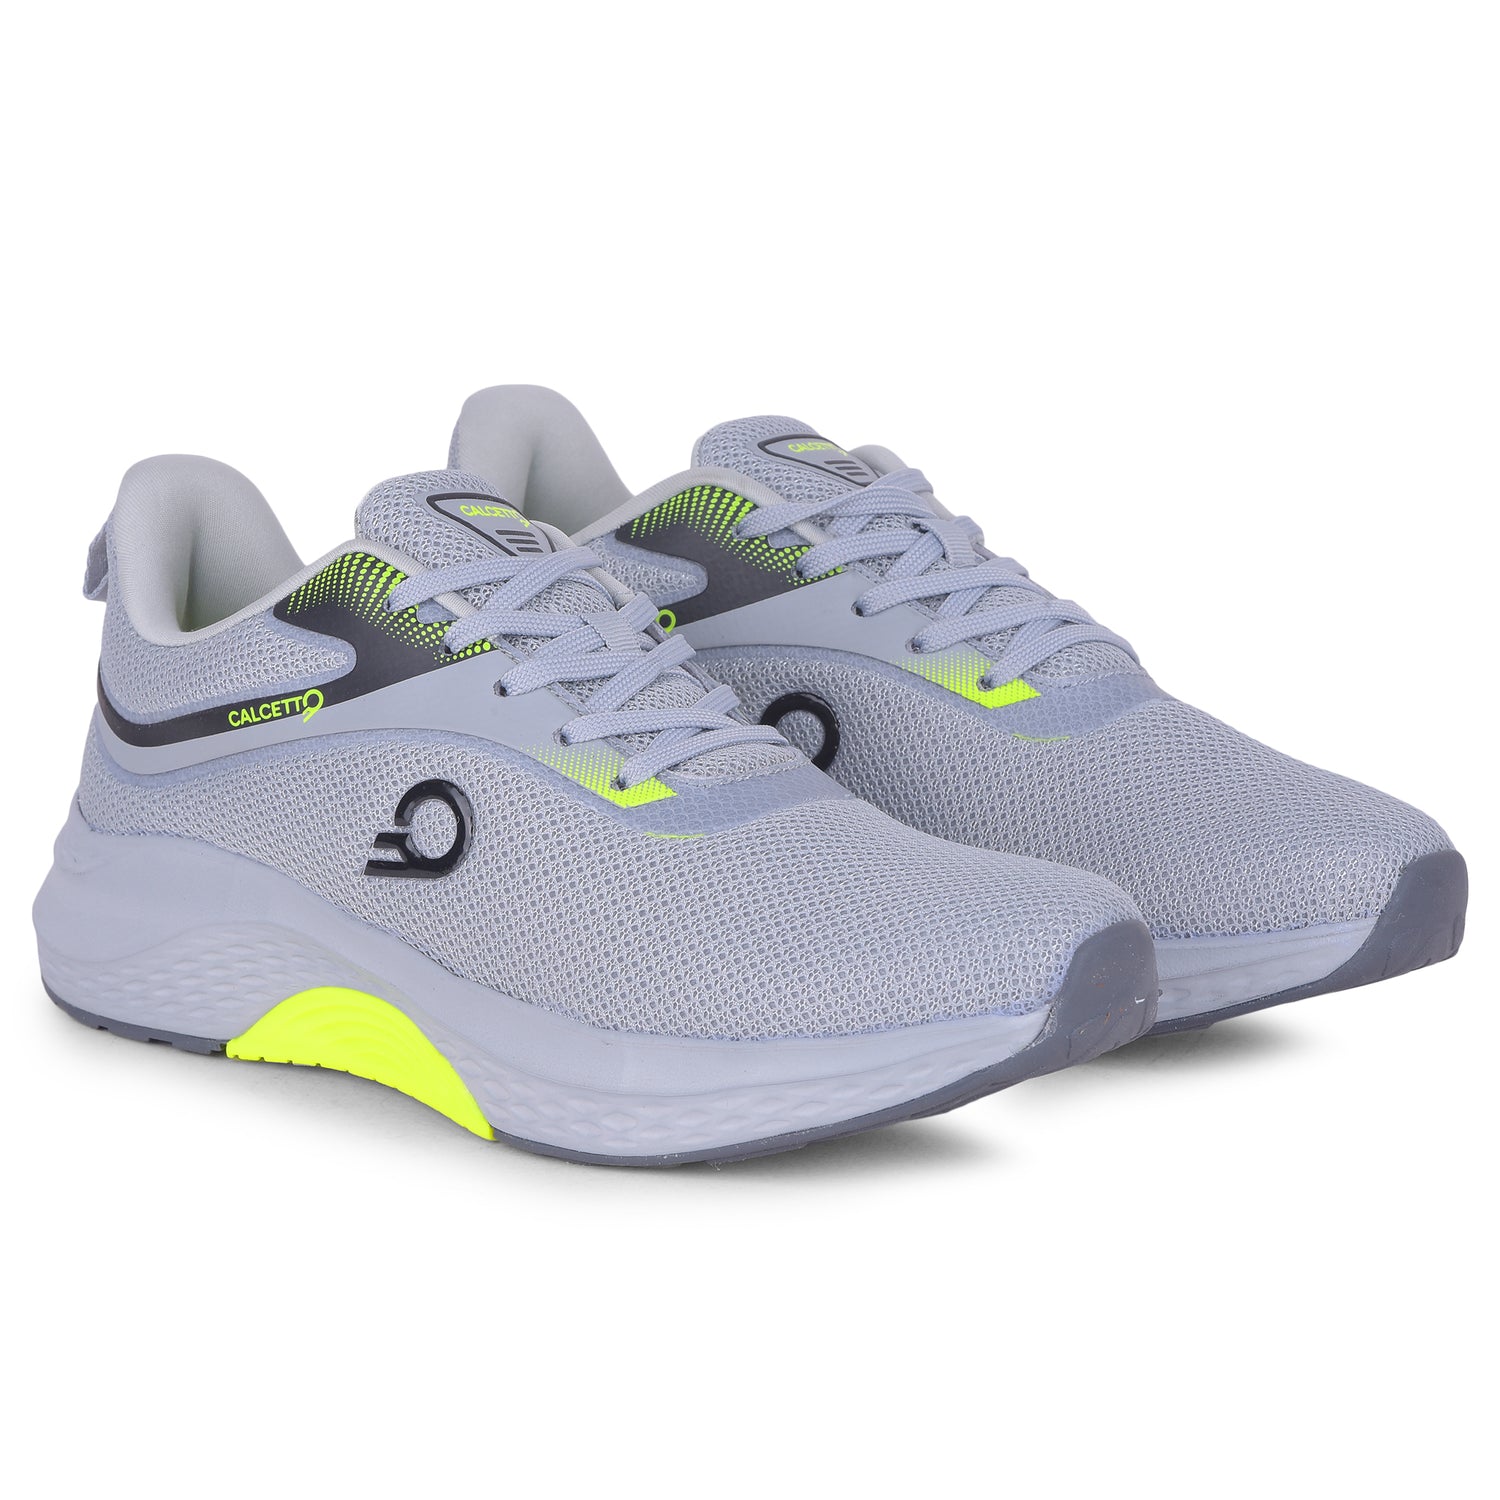 Calcetto CLT-2032 L Grey Lime Men Running Shoe